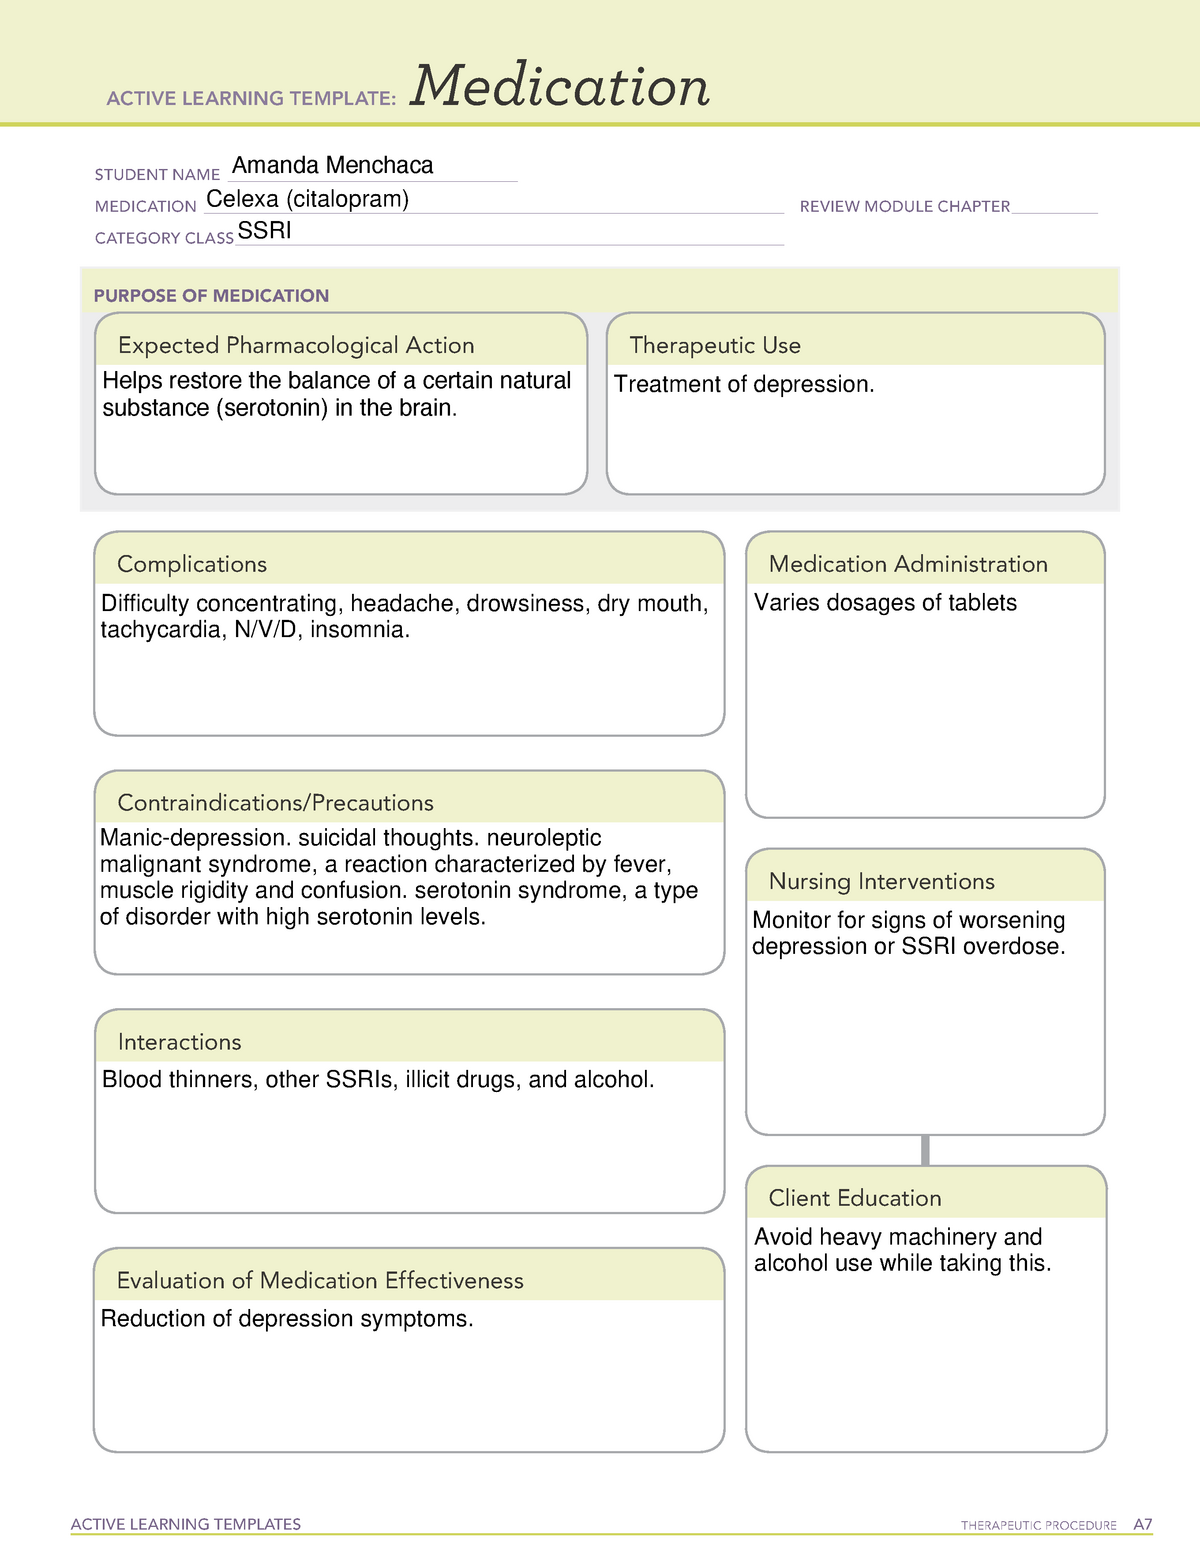 Celexa-MED - ATI medication card template - NUR21 - pharmacology Pertaining To Pharmacology Drug Card Template